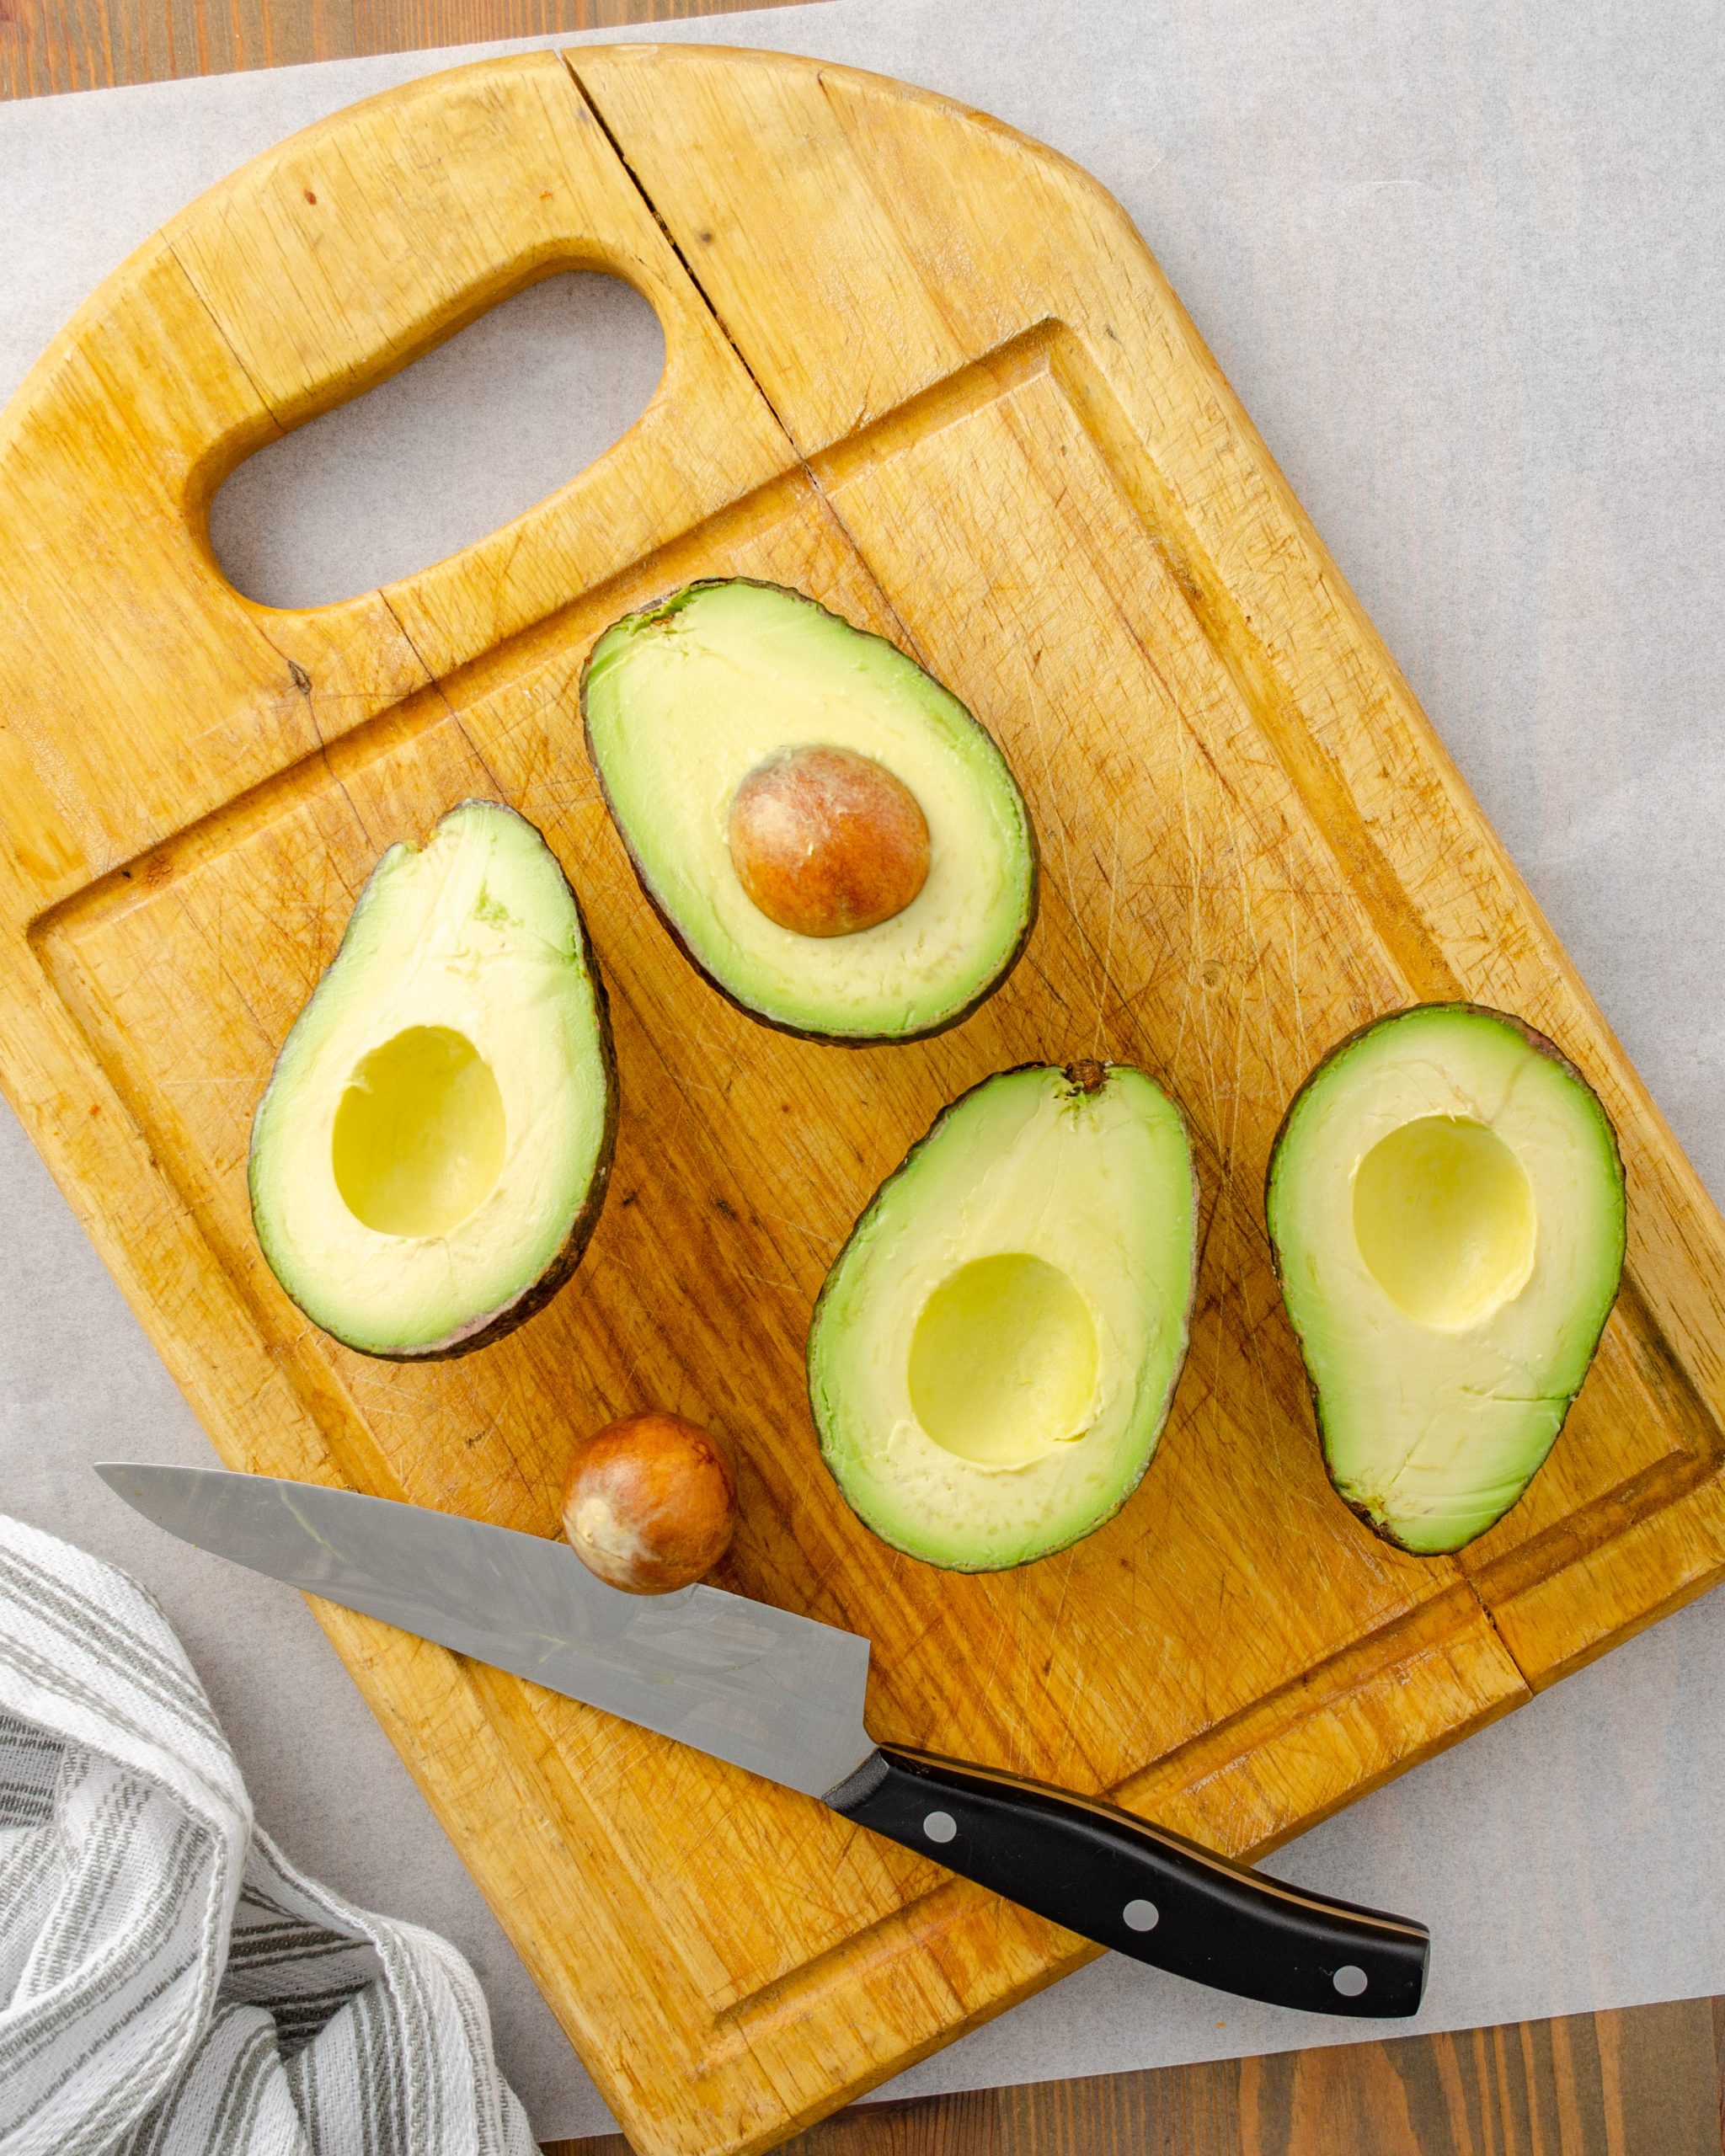 Cut the avocados in half lengthwise and remove the pit.